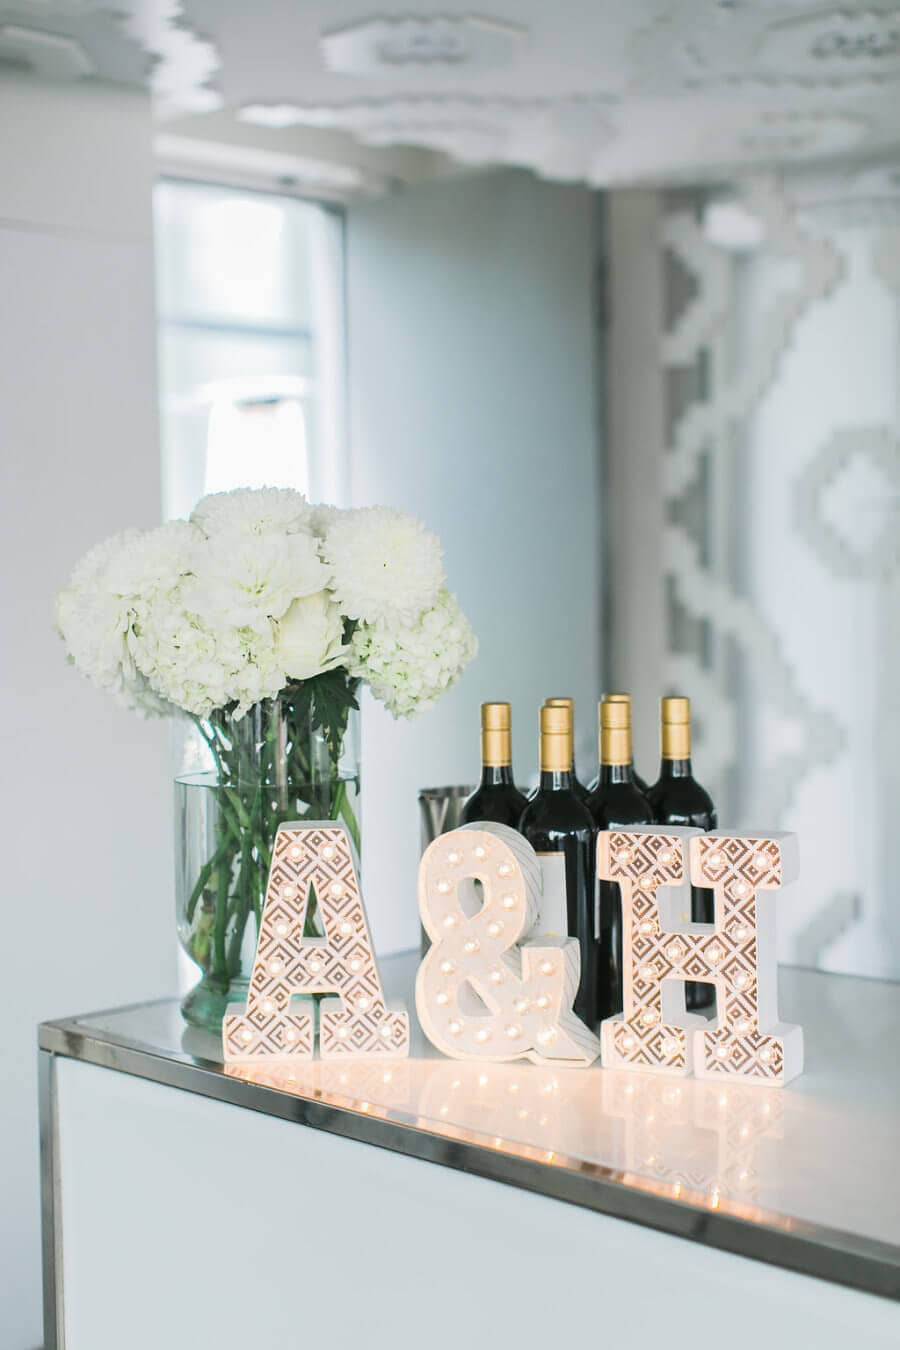 Decorating Ideas For An Engagement Party
 25 Amazing DIY Engagement Party Decoration Ideas for 2020